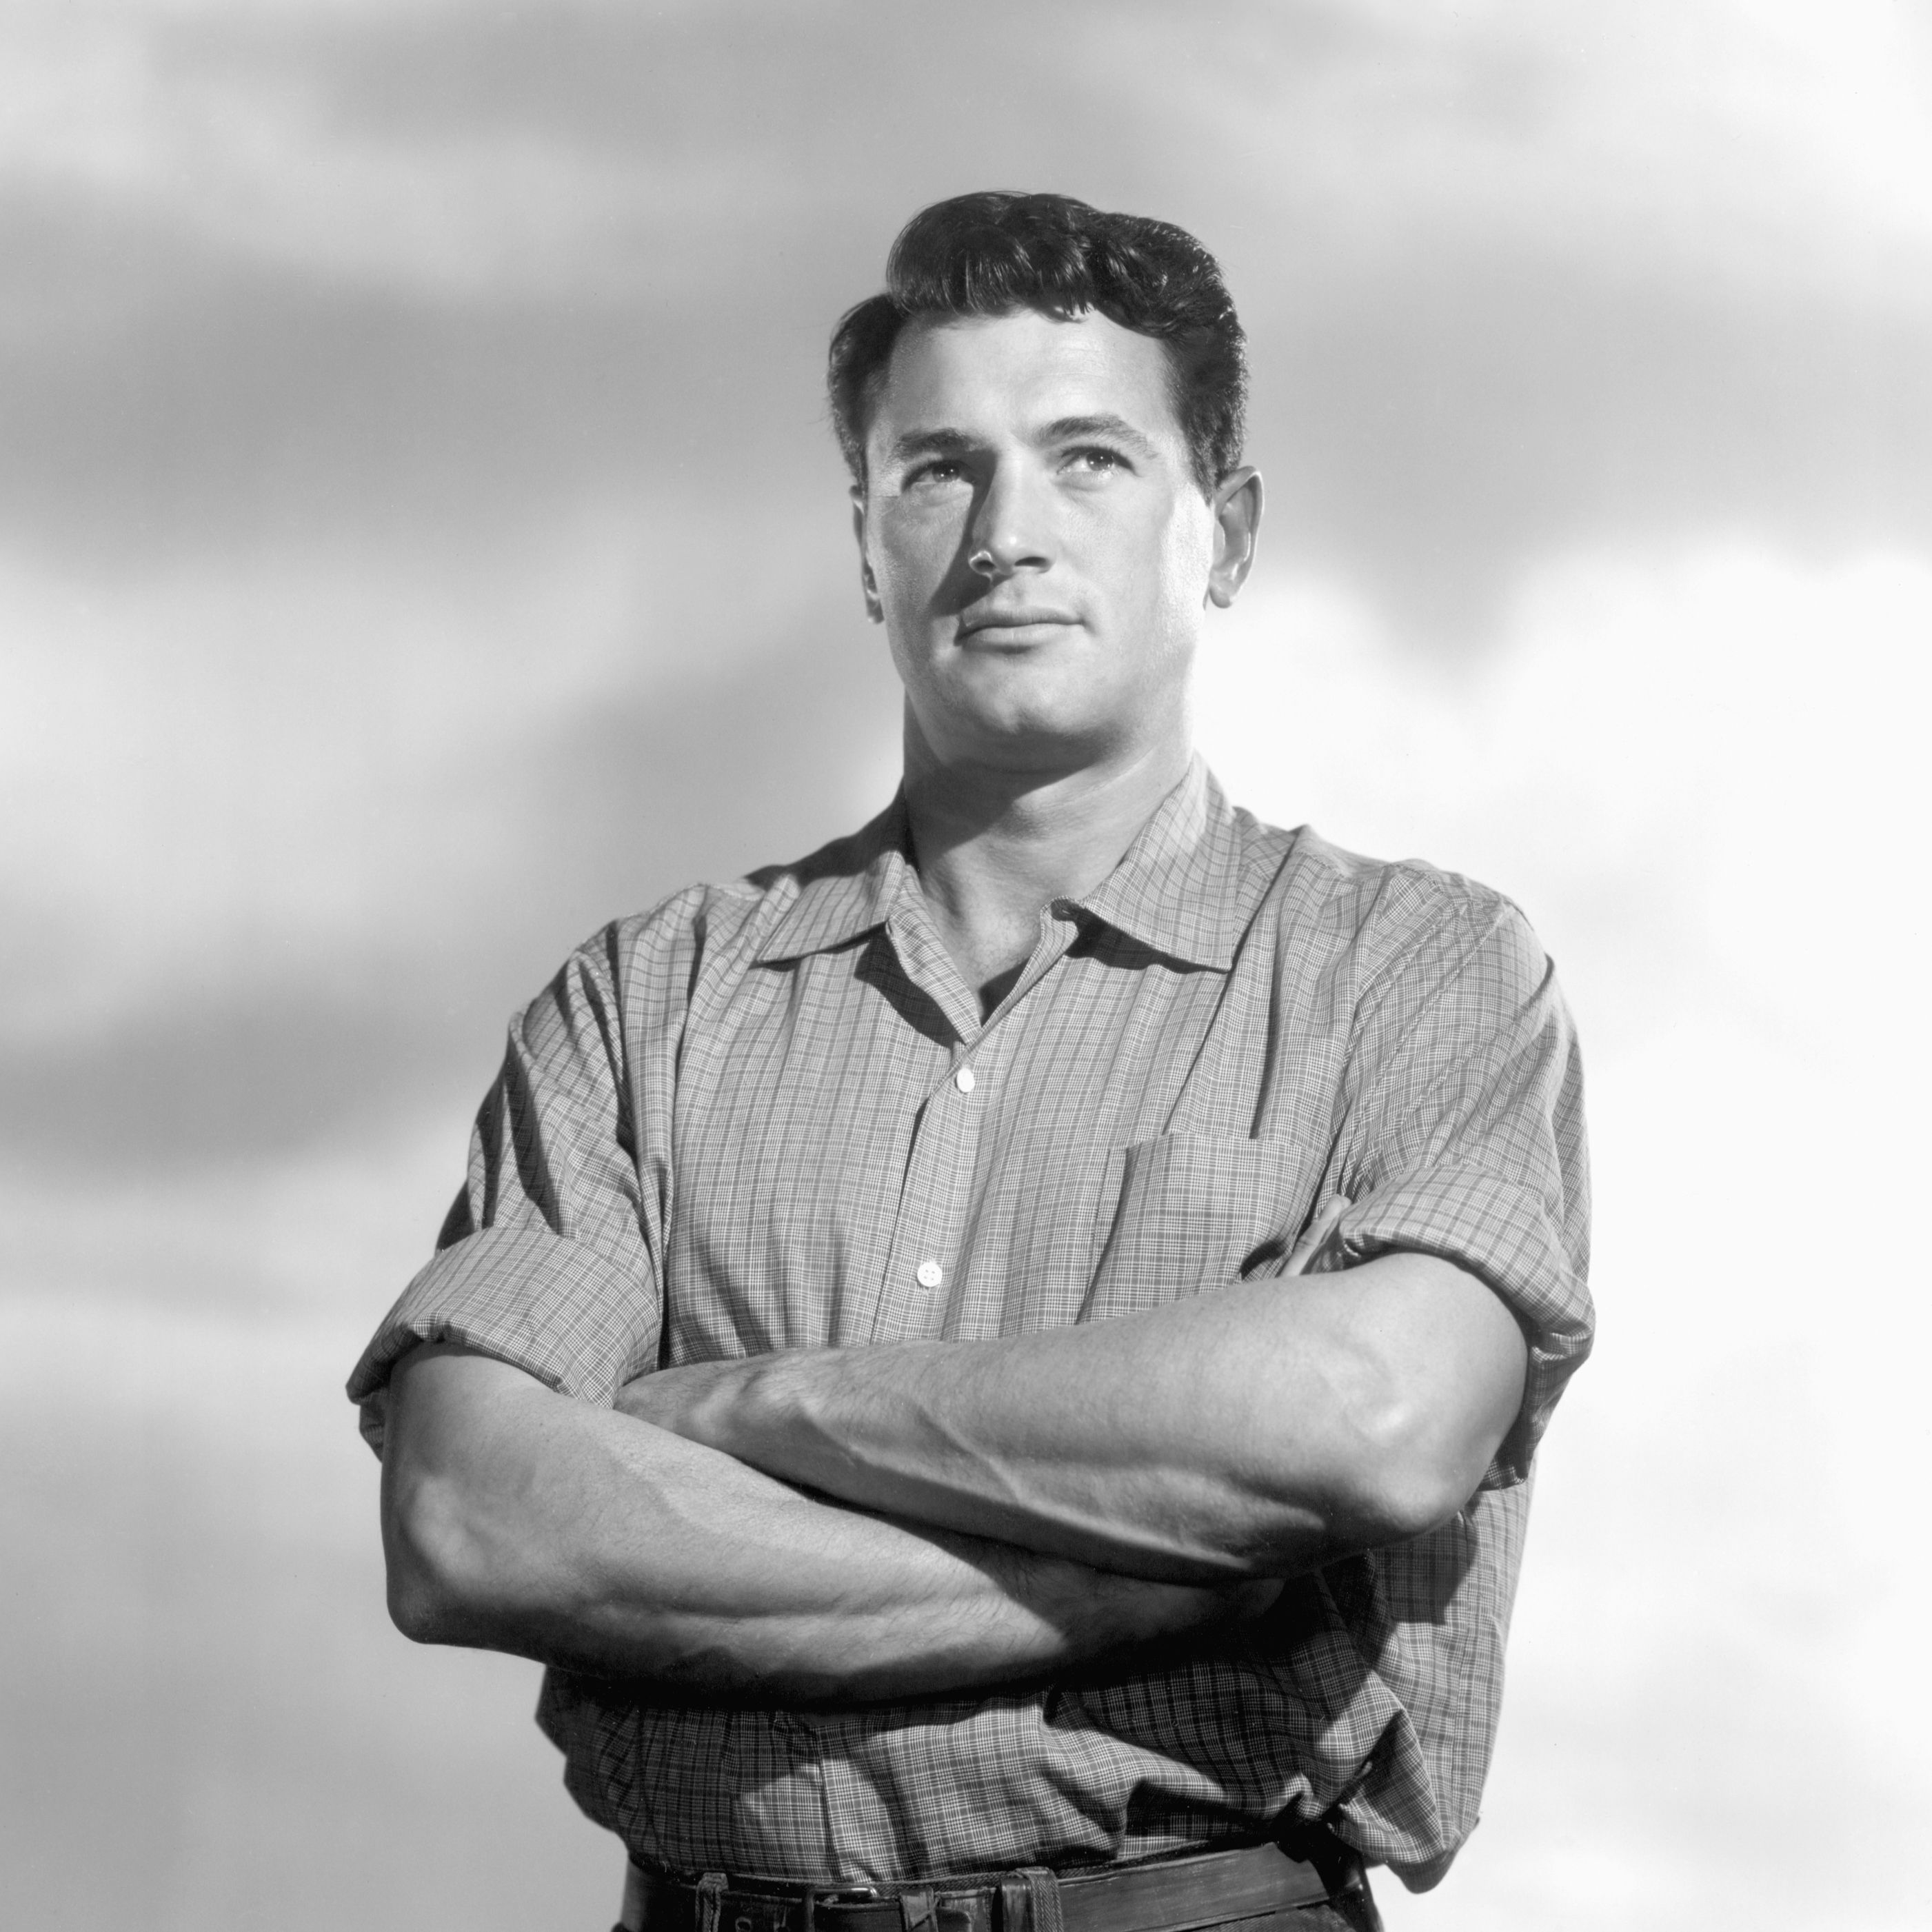 Who Was Rock Hudson? The Life of Hollywood's Closeted Gay Heartthrob